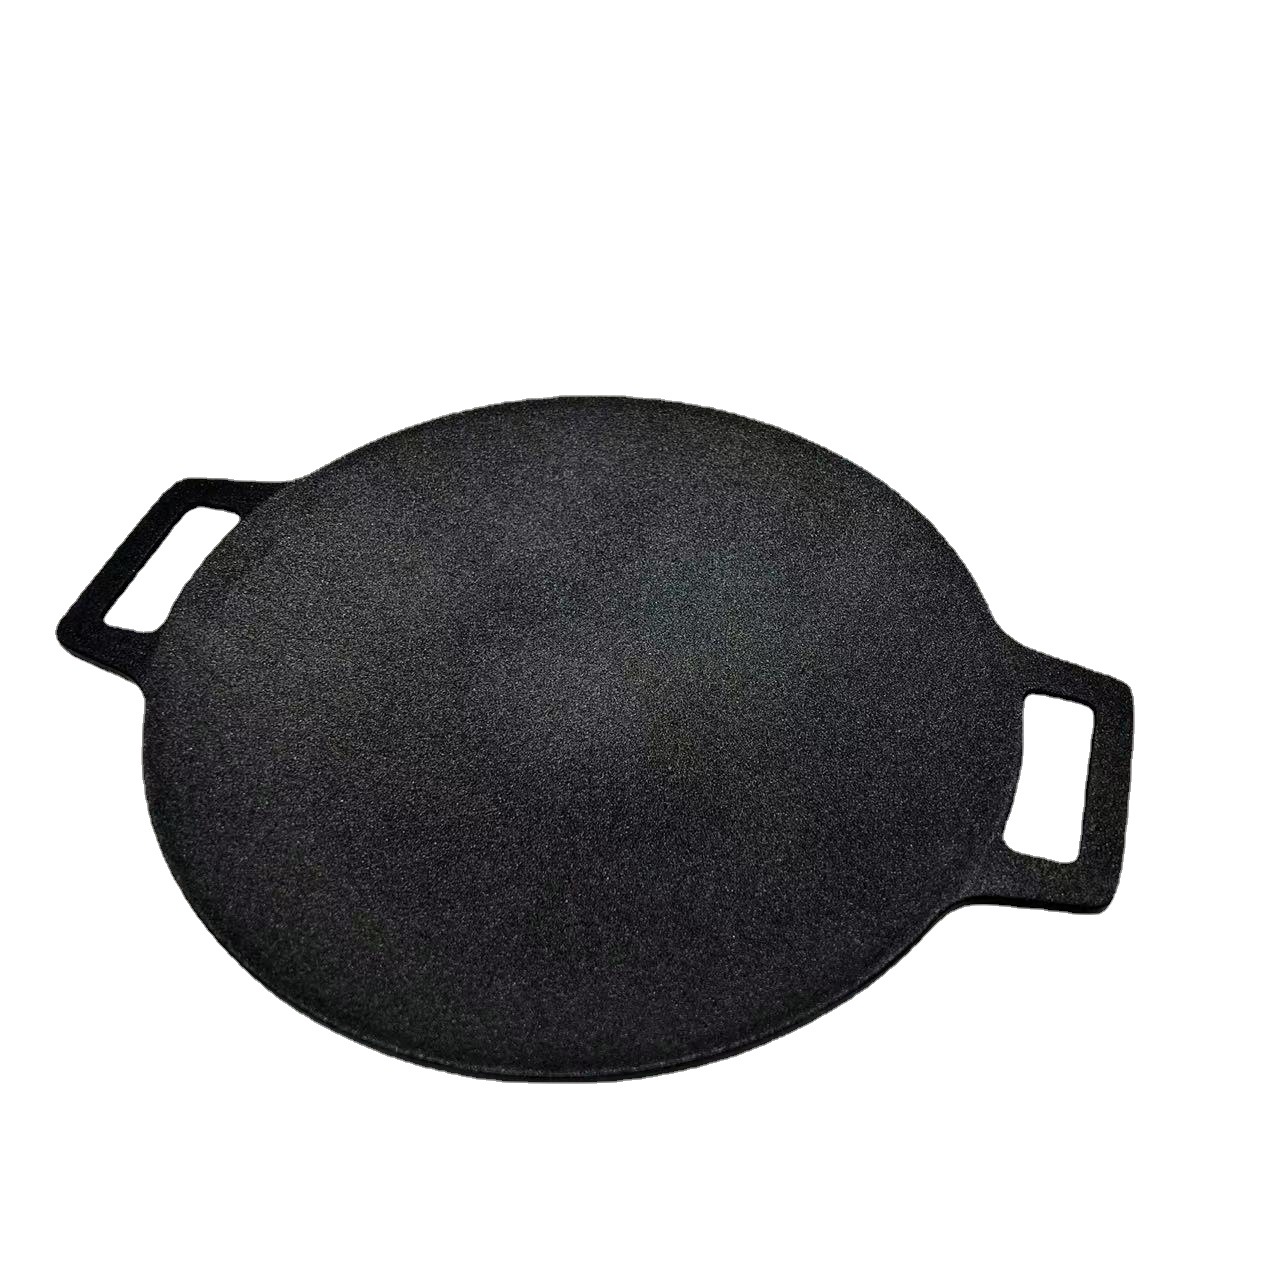 South Korea Xingsen Same Outdoor Baking Tray Camping Barbecue Plate Household Medical Stone Induction Cooker Portable Fry Pan